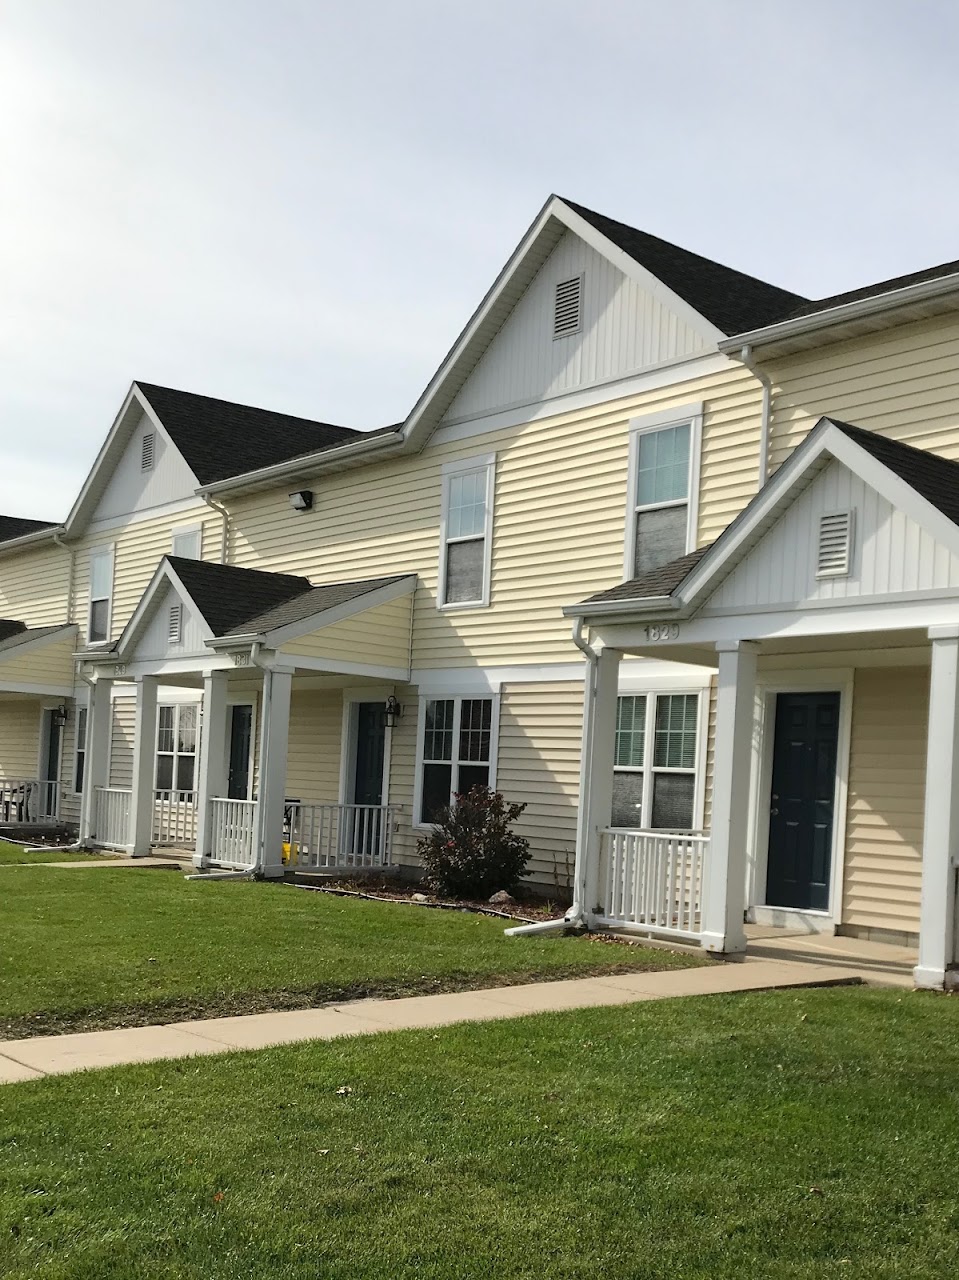 Photo of PICKEREL PARK TOWNHOMES. Affordable housing located at MULTIPLE BUILDING ADDRESSES ALBERT LEA, MN 56007